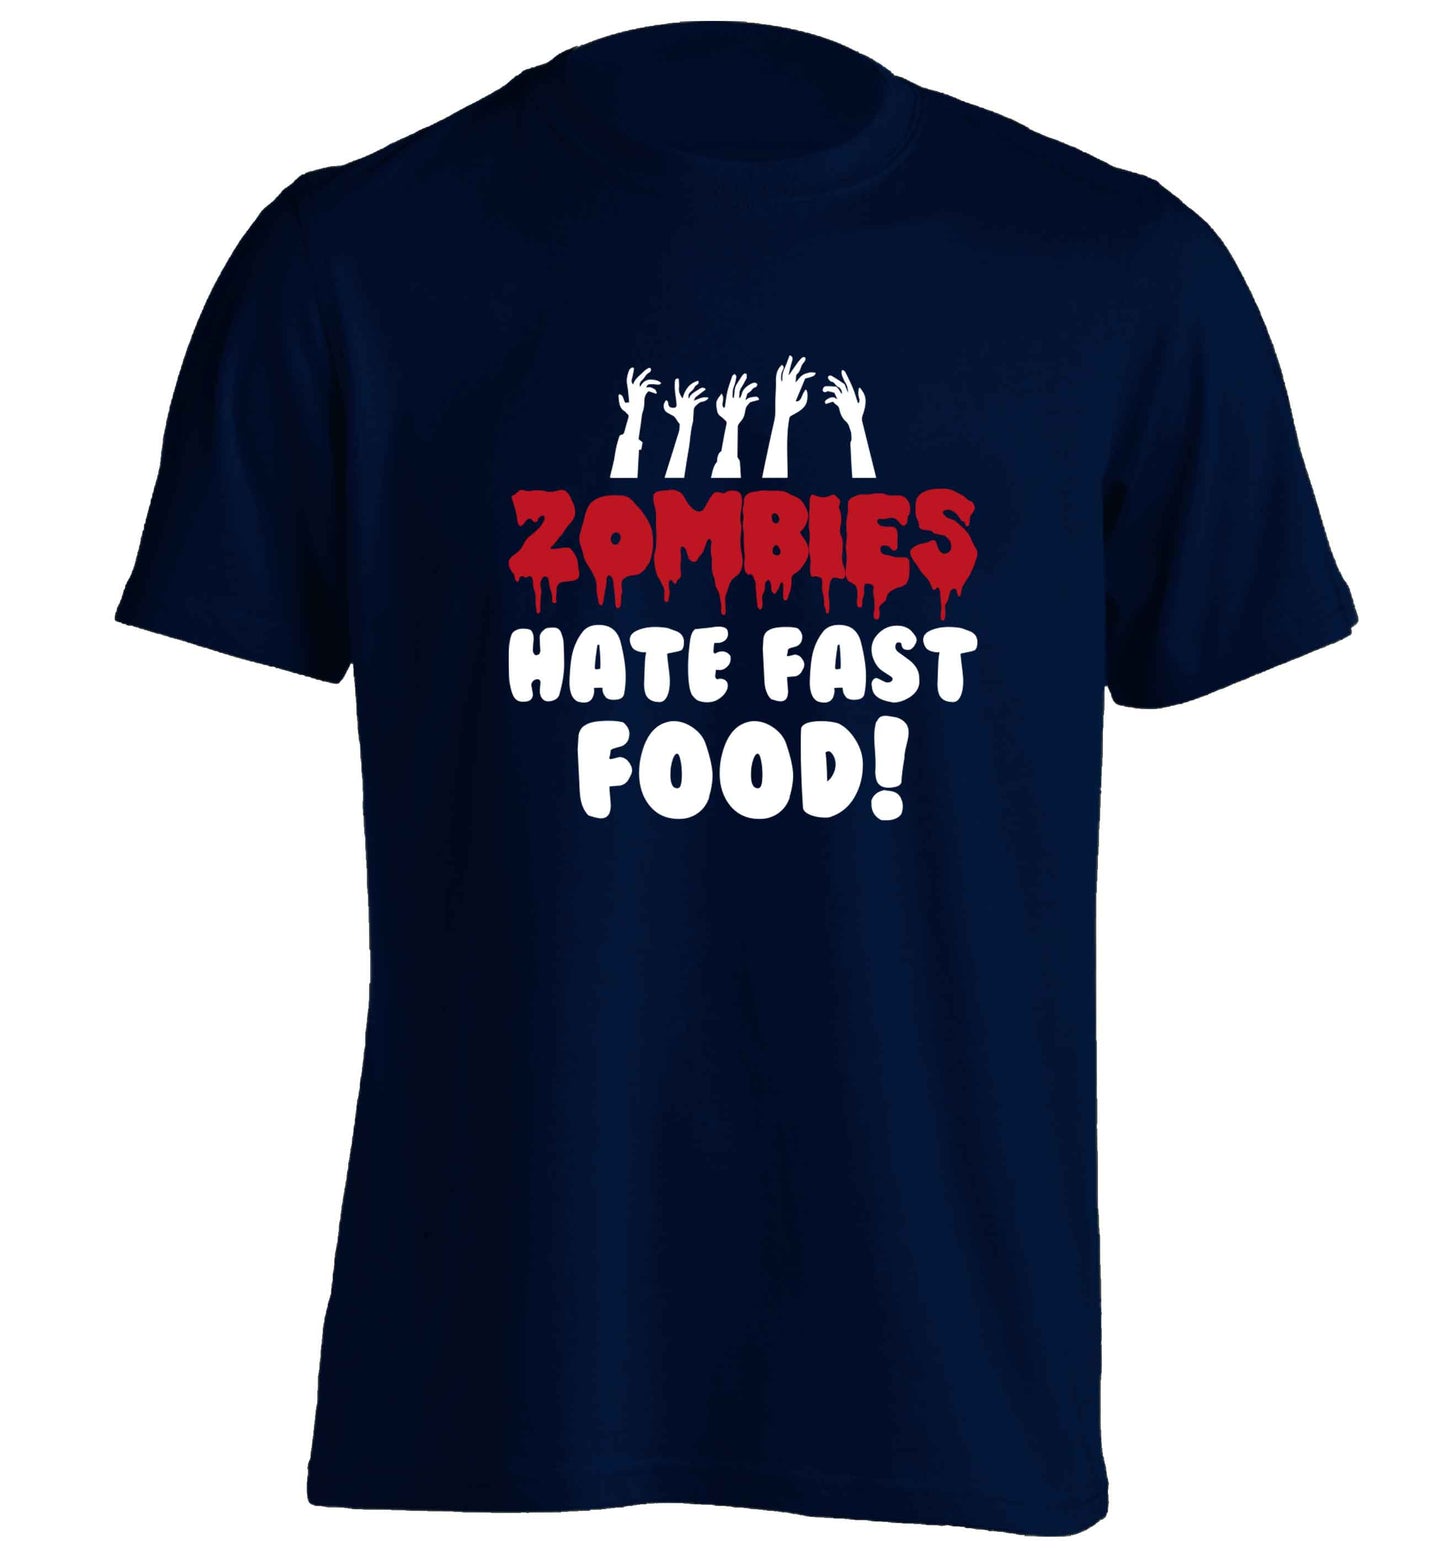 Zombies hate fast food adults unisex navy Tshirt 2XL